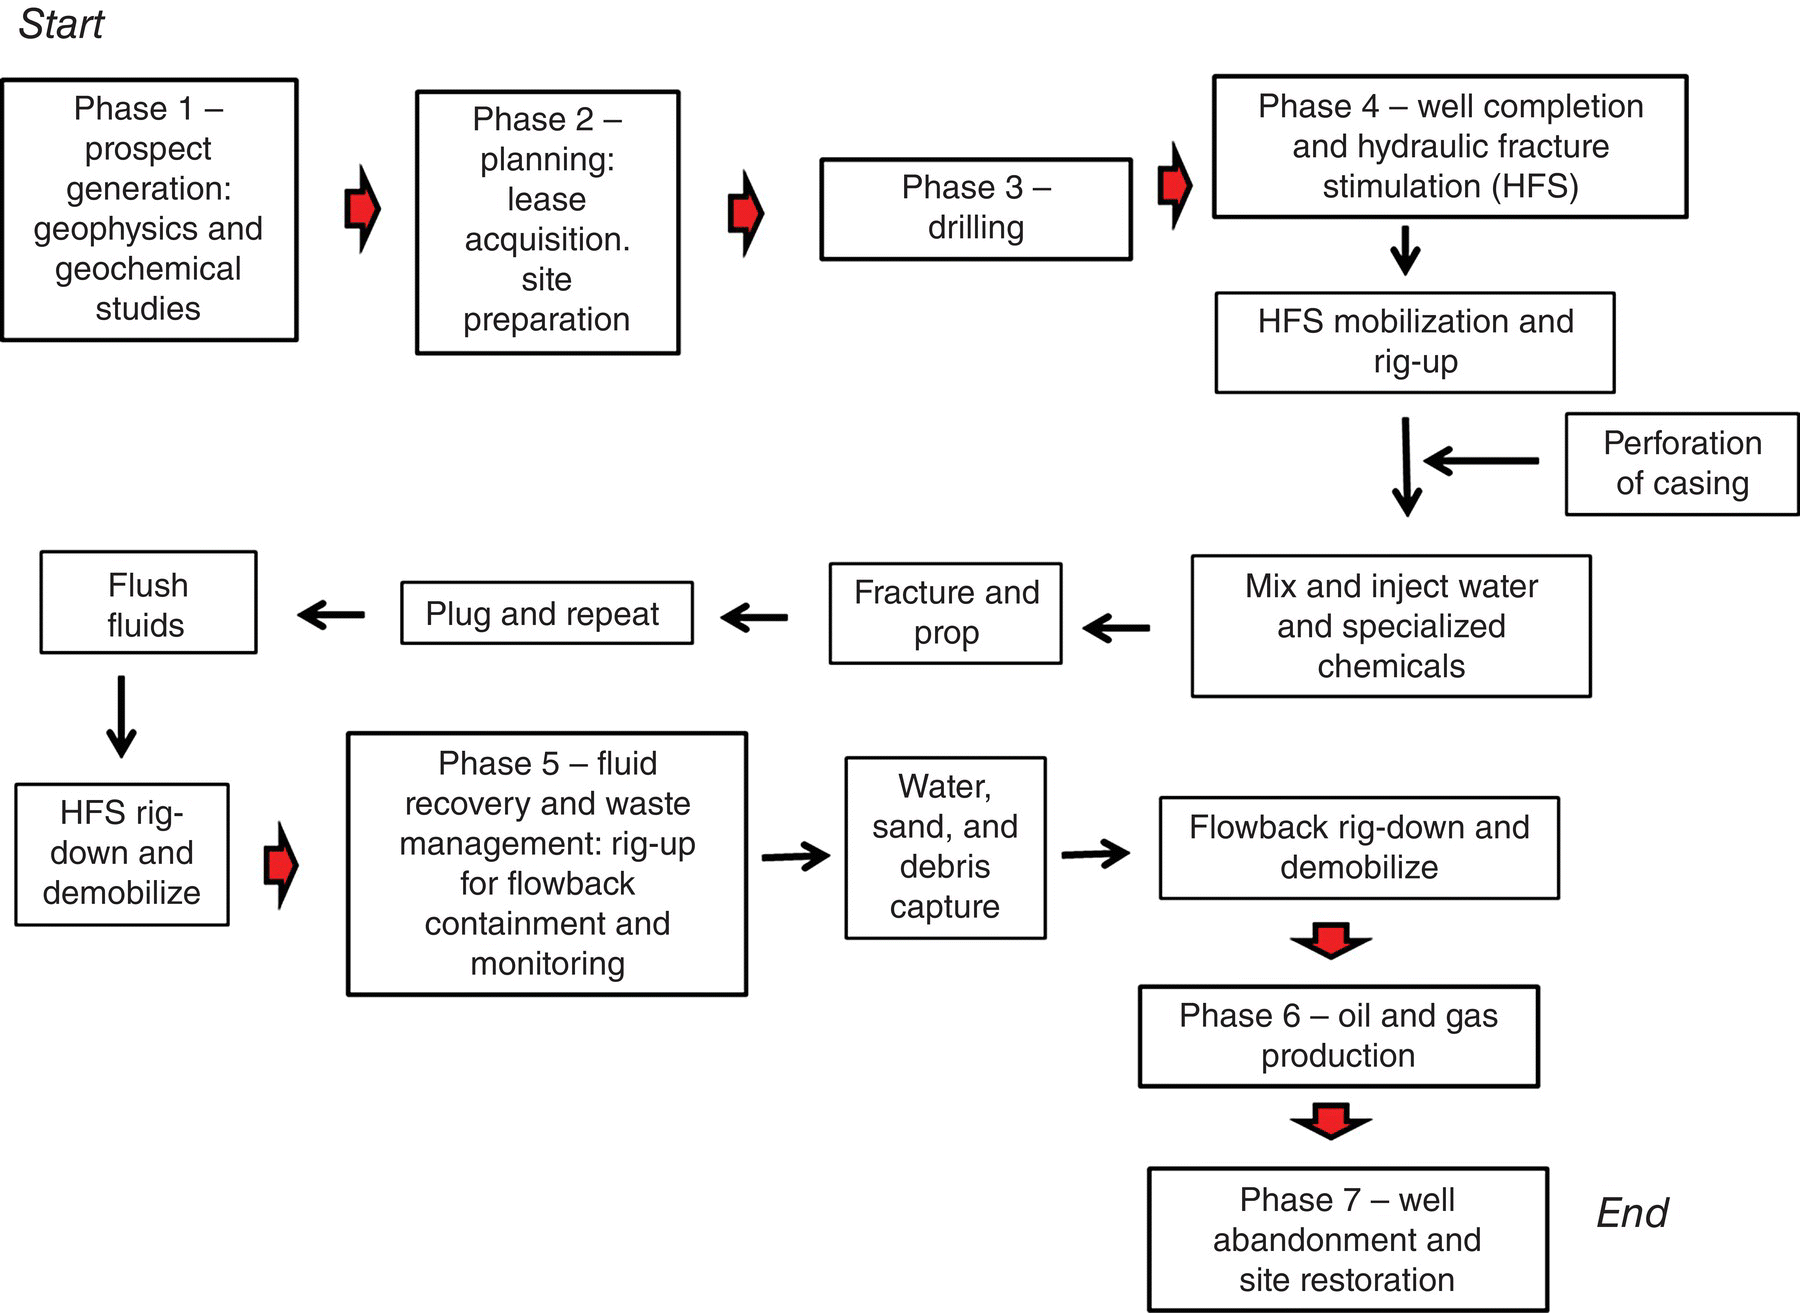 Diagram flow illustrating the summary of the simplified exploration–production life cycle from phase 1–prospect generation to phase 6–oil and gas production, to phase 7–well abandonment and site restoration.